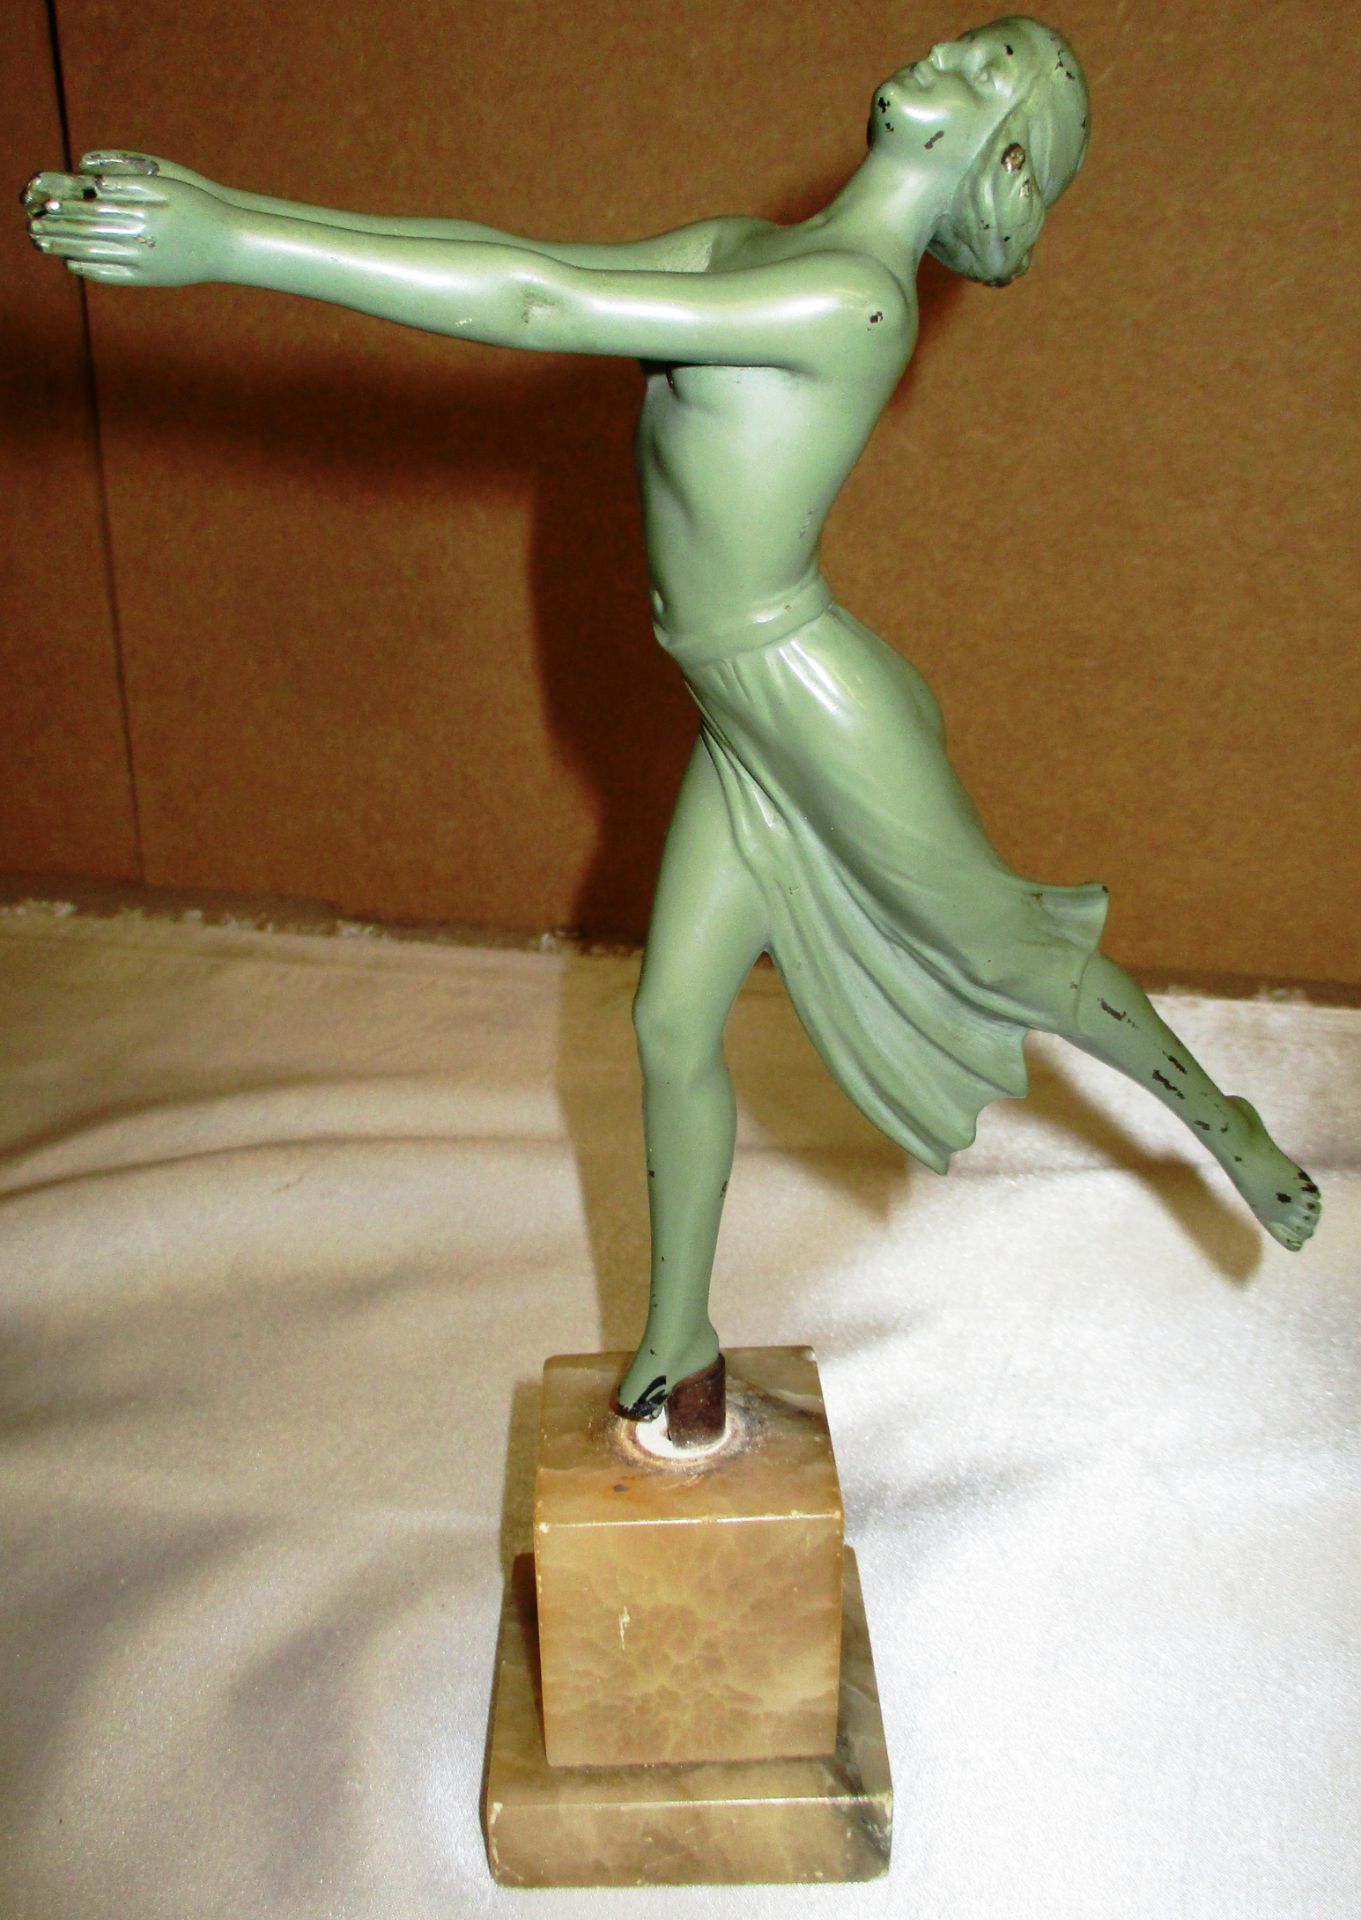 A green painted metal Art Deco figurine on Onyx stand (damage to standing foot)